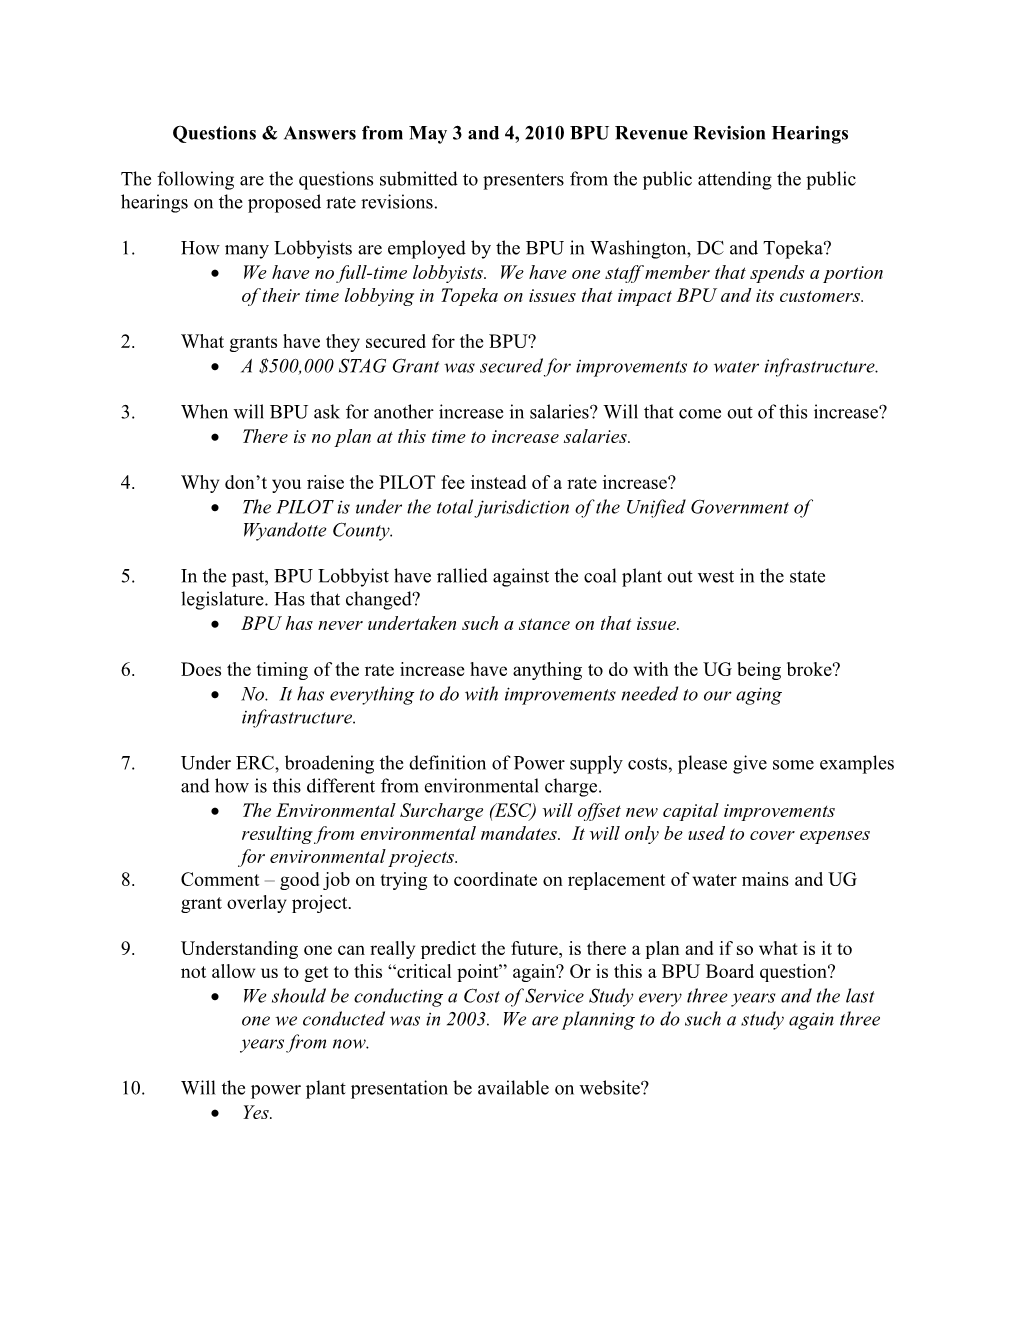 Questions & Answers from May 3 and 4, 2010 BPU Rate Hearings